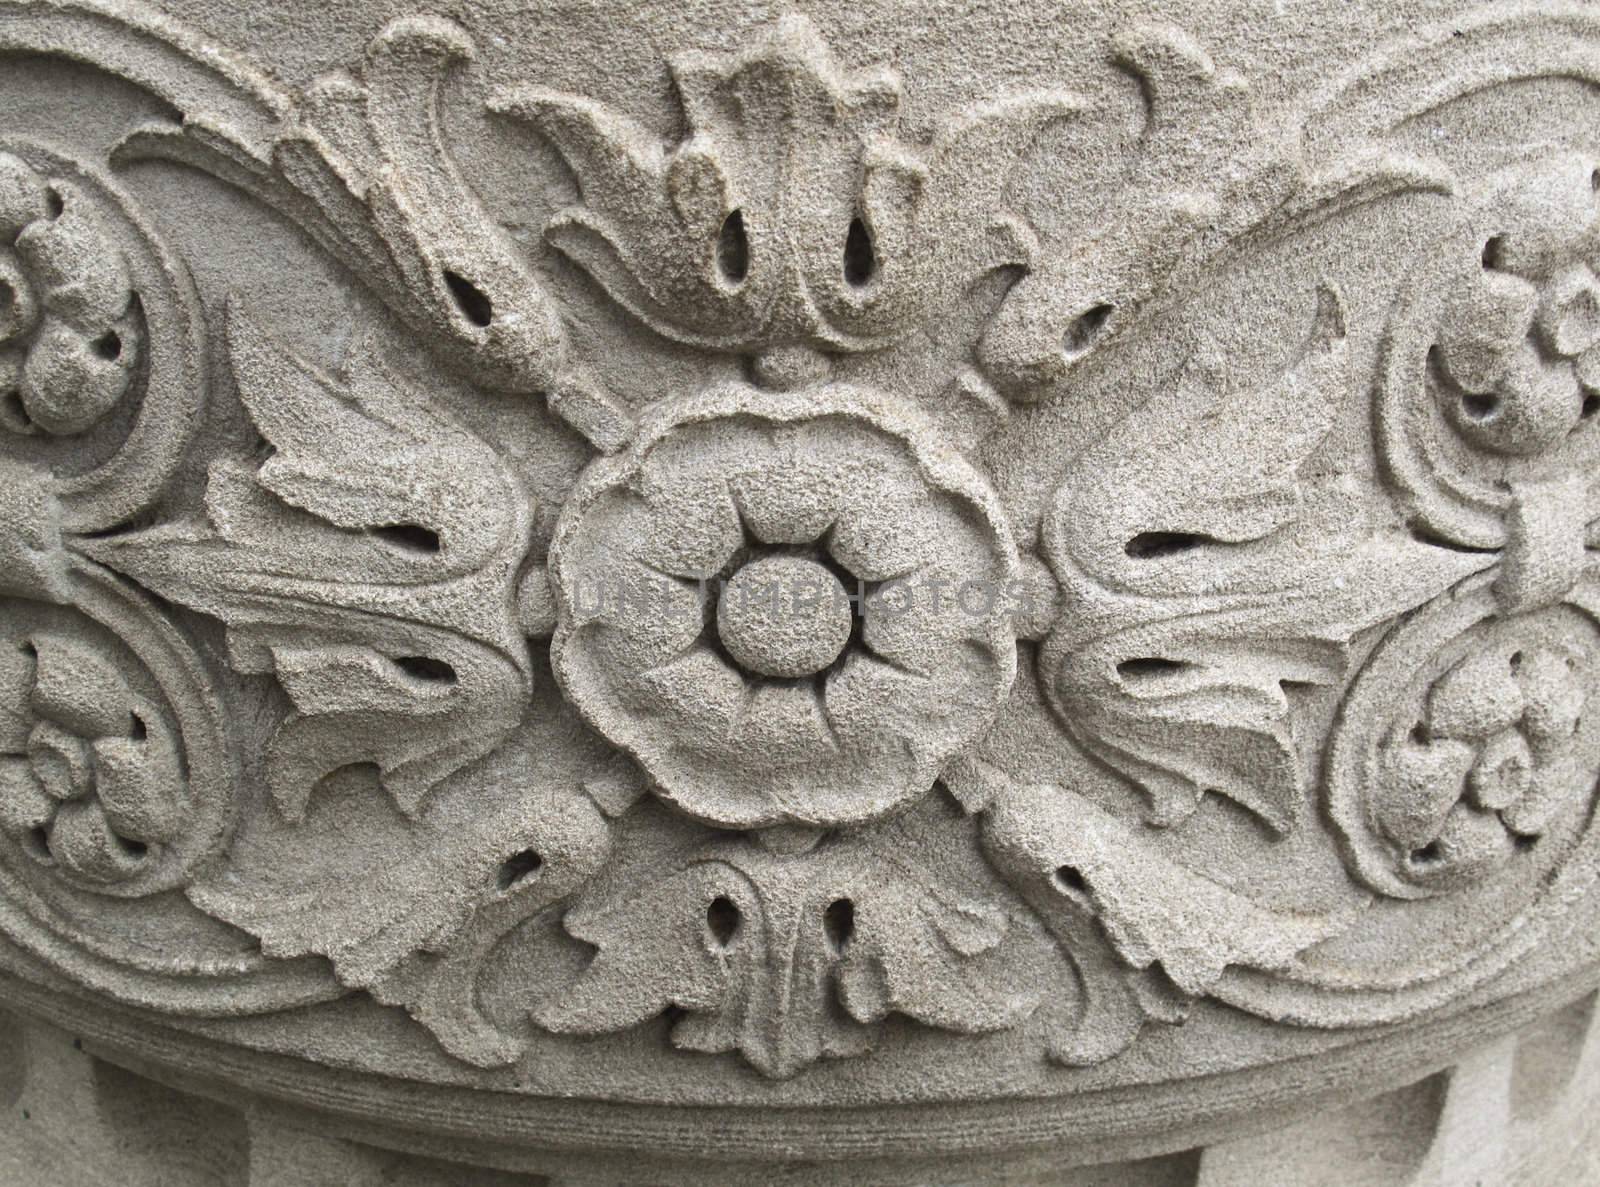 Floral pattern carved into stone by ADavis